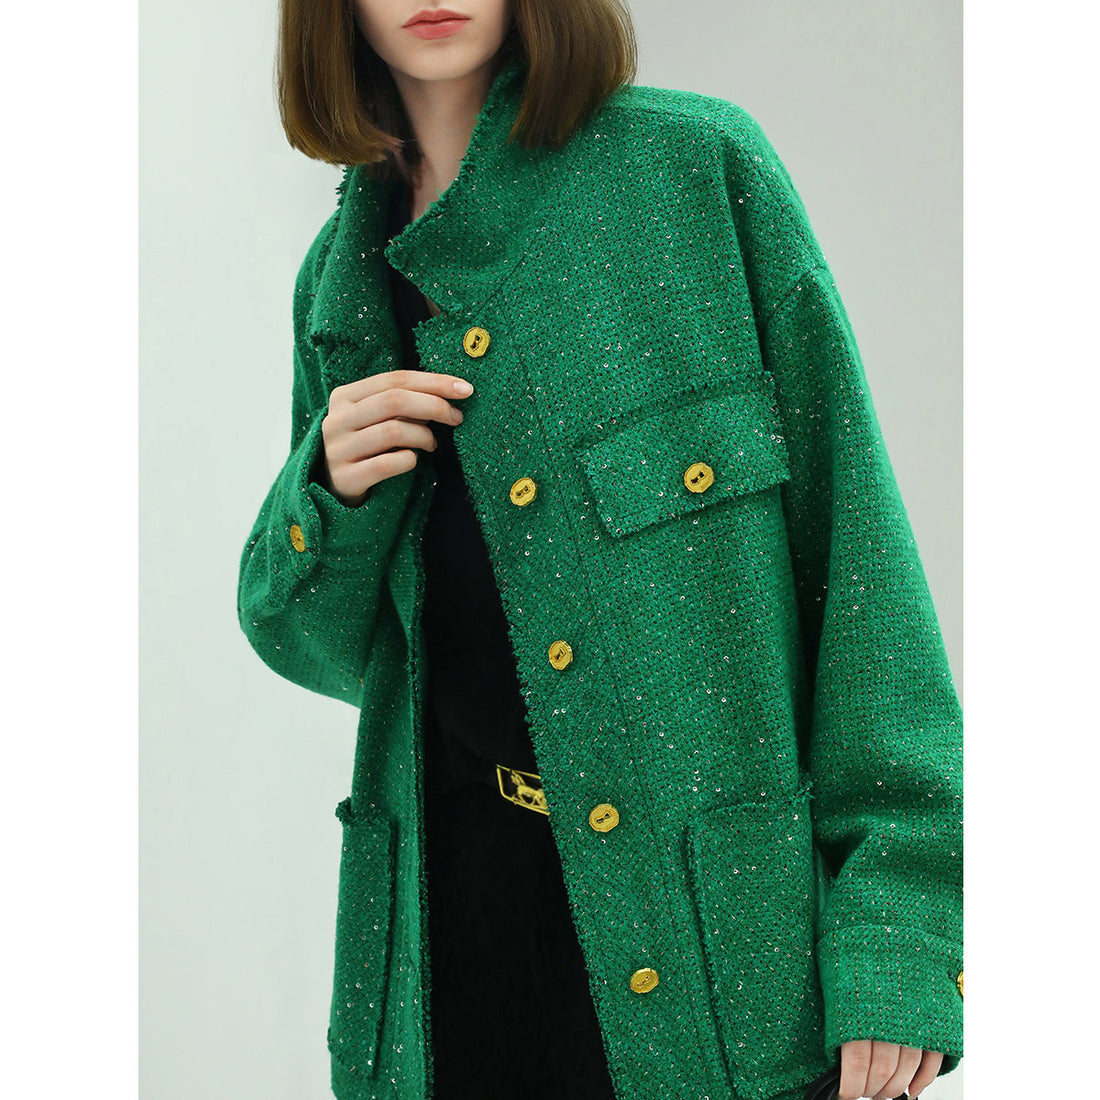 emerald-green-single-breasted-tweed-coat-with-gold-buttons_all_green_2.jpg